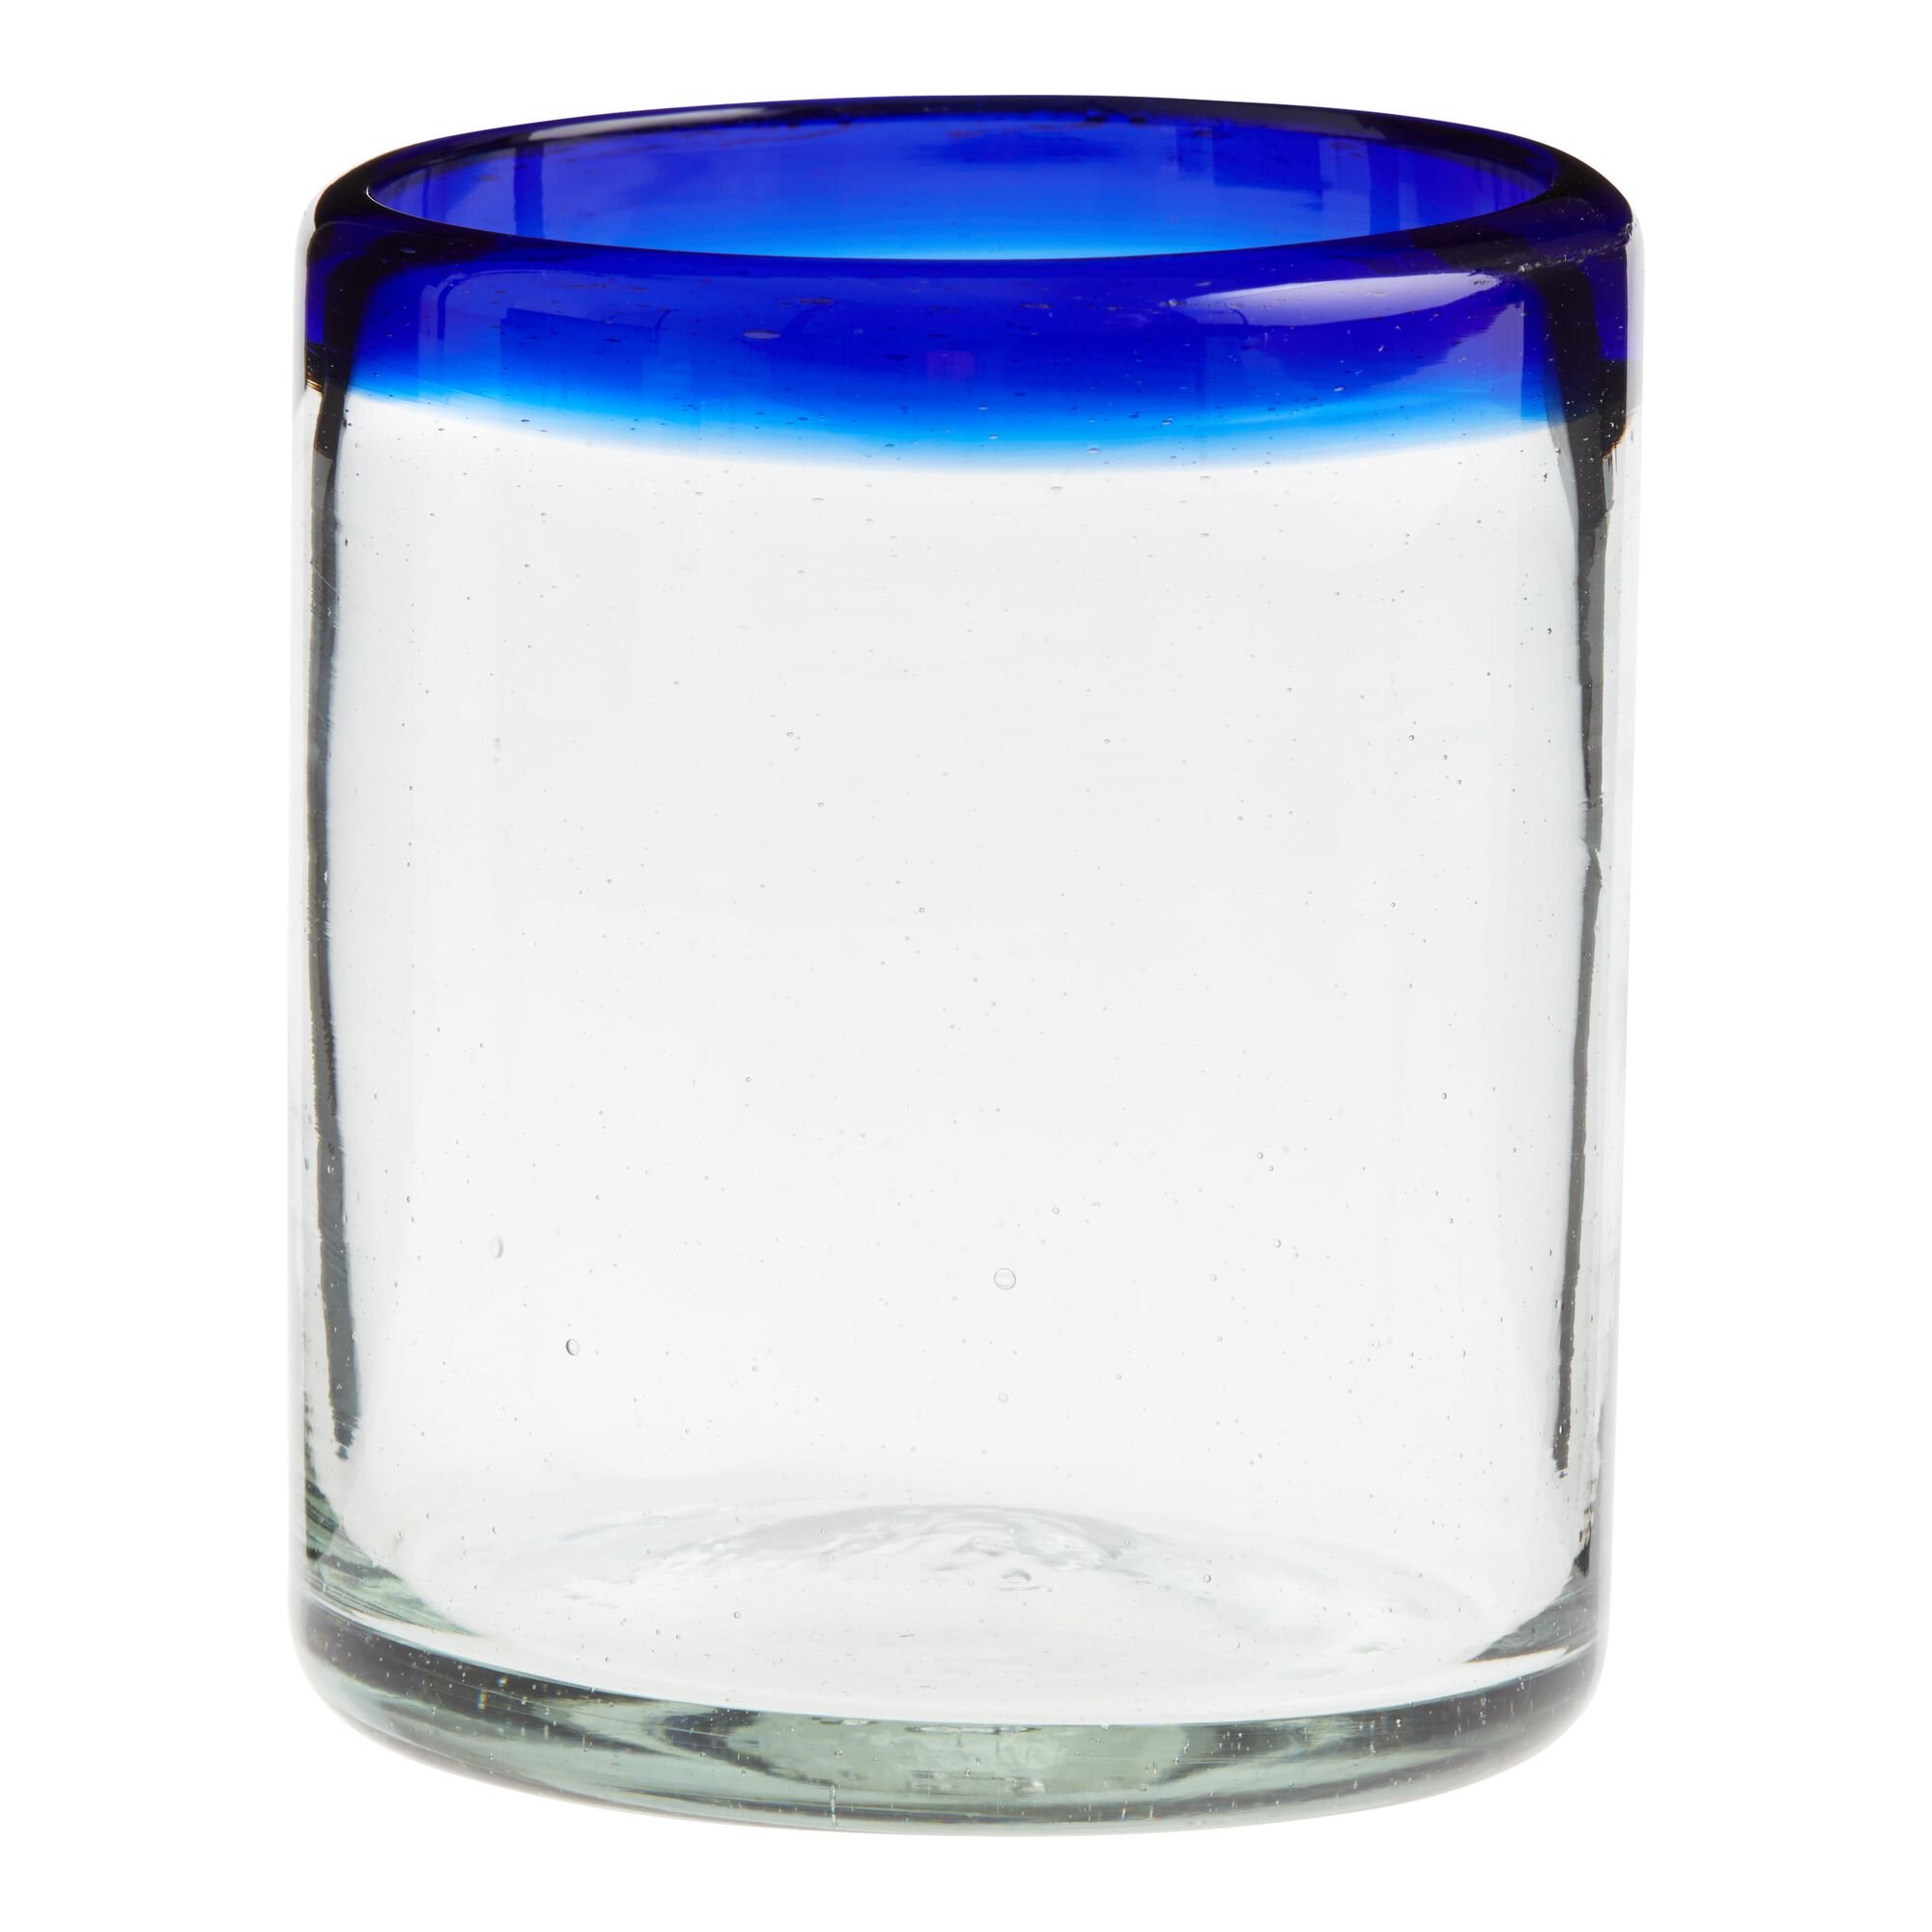 World Market - $27.96 - Rocco Blue Double Old Fashioned Glass Set Of 4